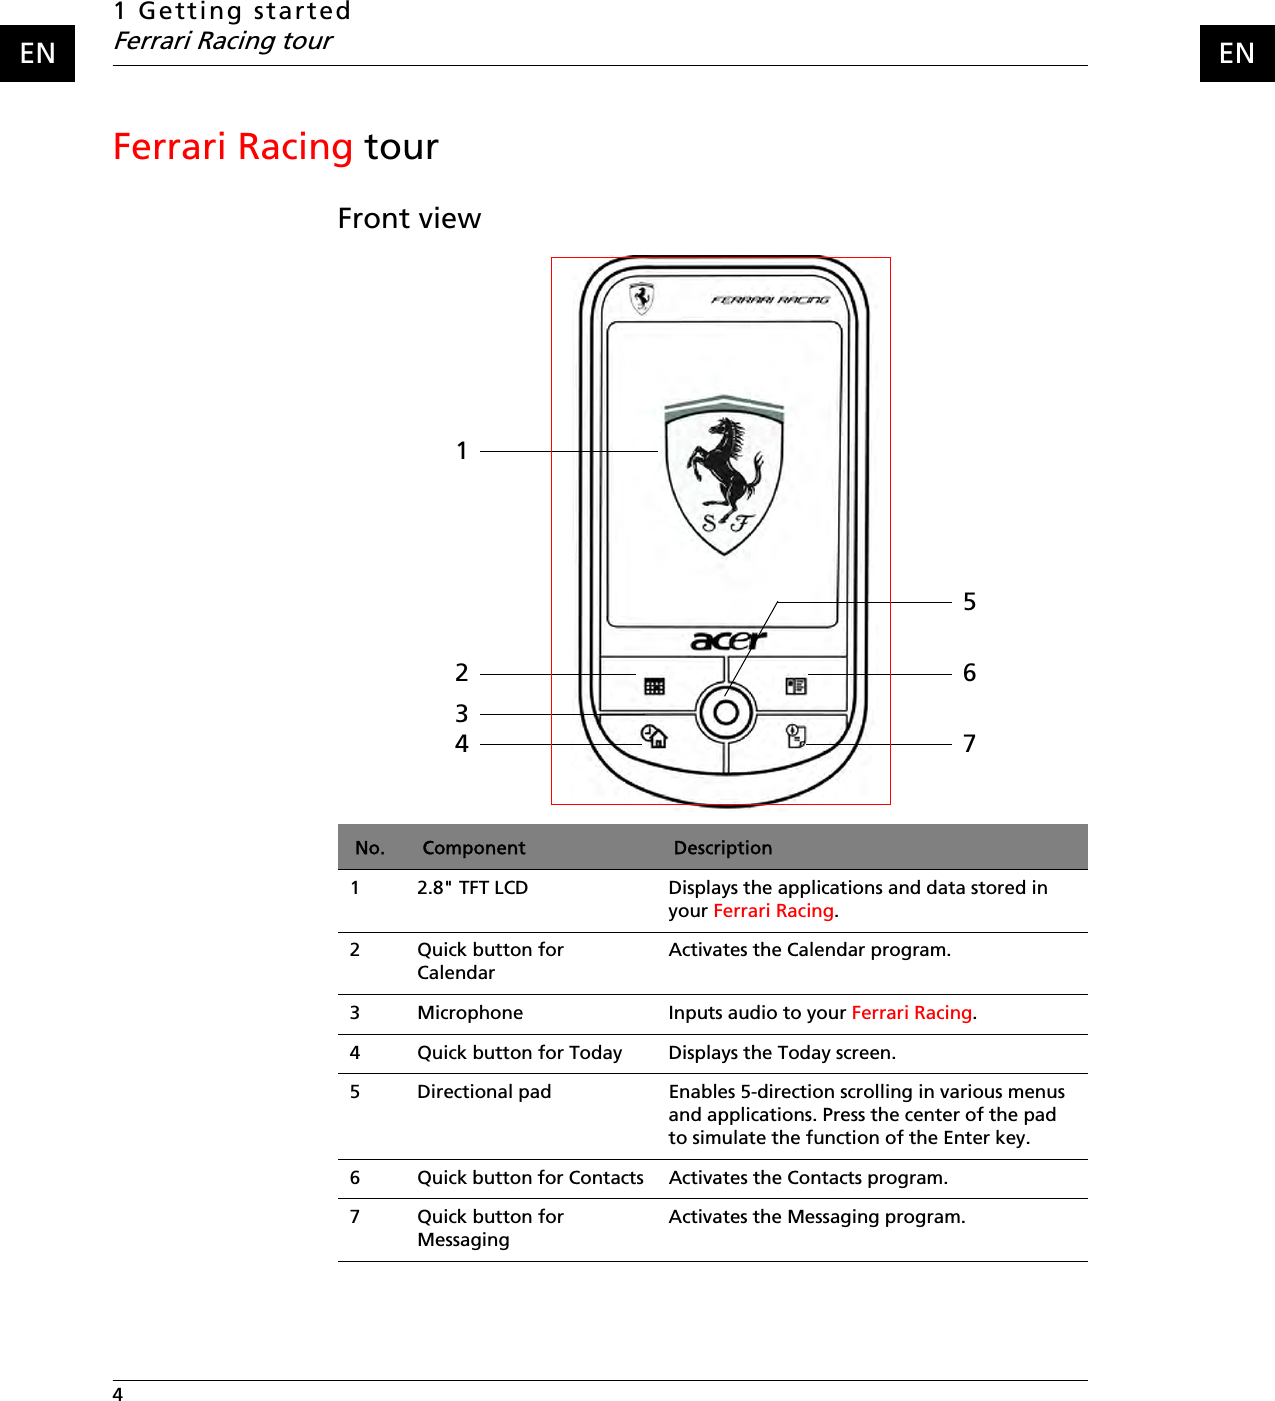 1 Getting startedFerrari Racing tour4   ENENFerrari Racing tour Front view1247653No. Component Description1 2.8&quot; TFT LCD Displays the applications and data stored in your Ferrari Racing.2 Quick button for CalendarActivates the Calendar program.3 Microphone Inputs audio to your Ferrari Racing.4 Quick button for Today Displays the Today screen. 5 Directional pad Enables 5-direction scrolling in various menus and applications. Press the center of the pad to simulate the function of the Enter key.6 Quick button for Contacts Activates the Contacts program. 7 Quick button for MessagingActivates the Messaging program.